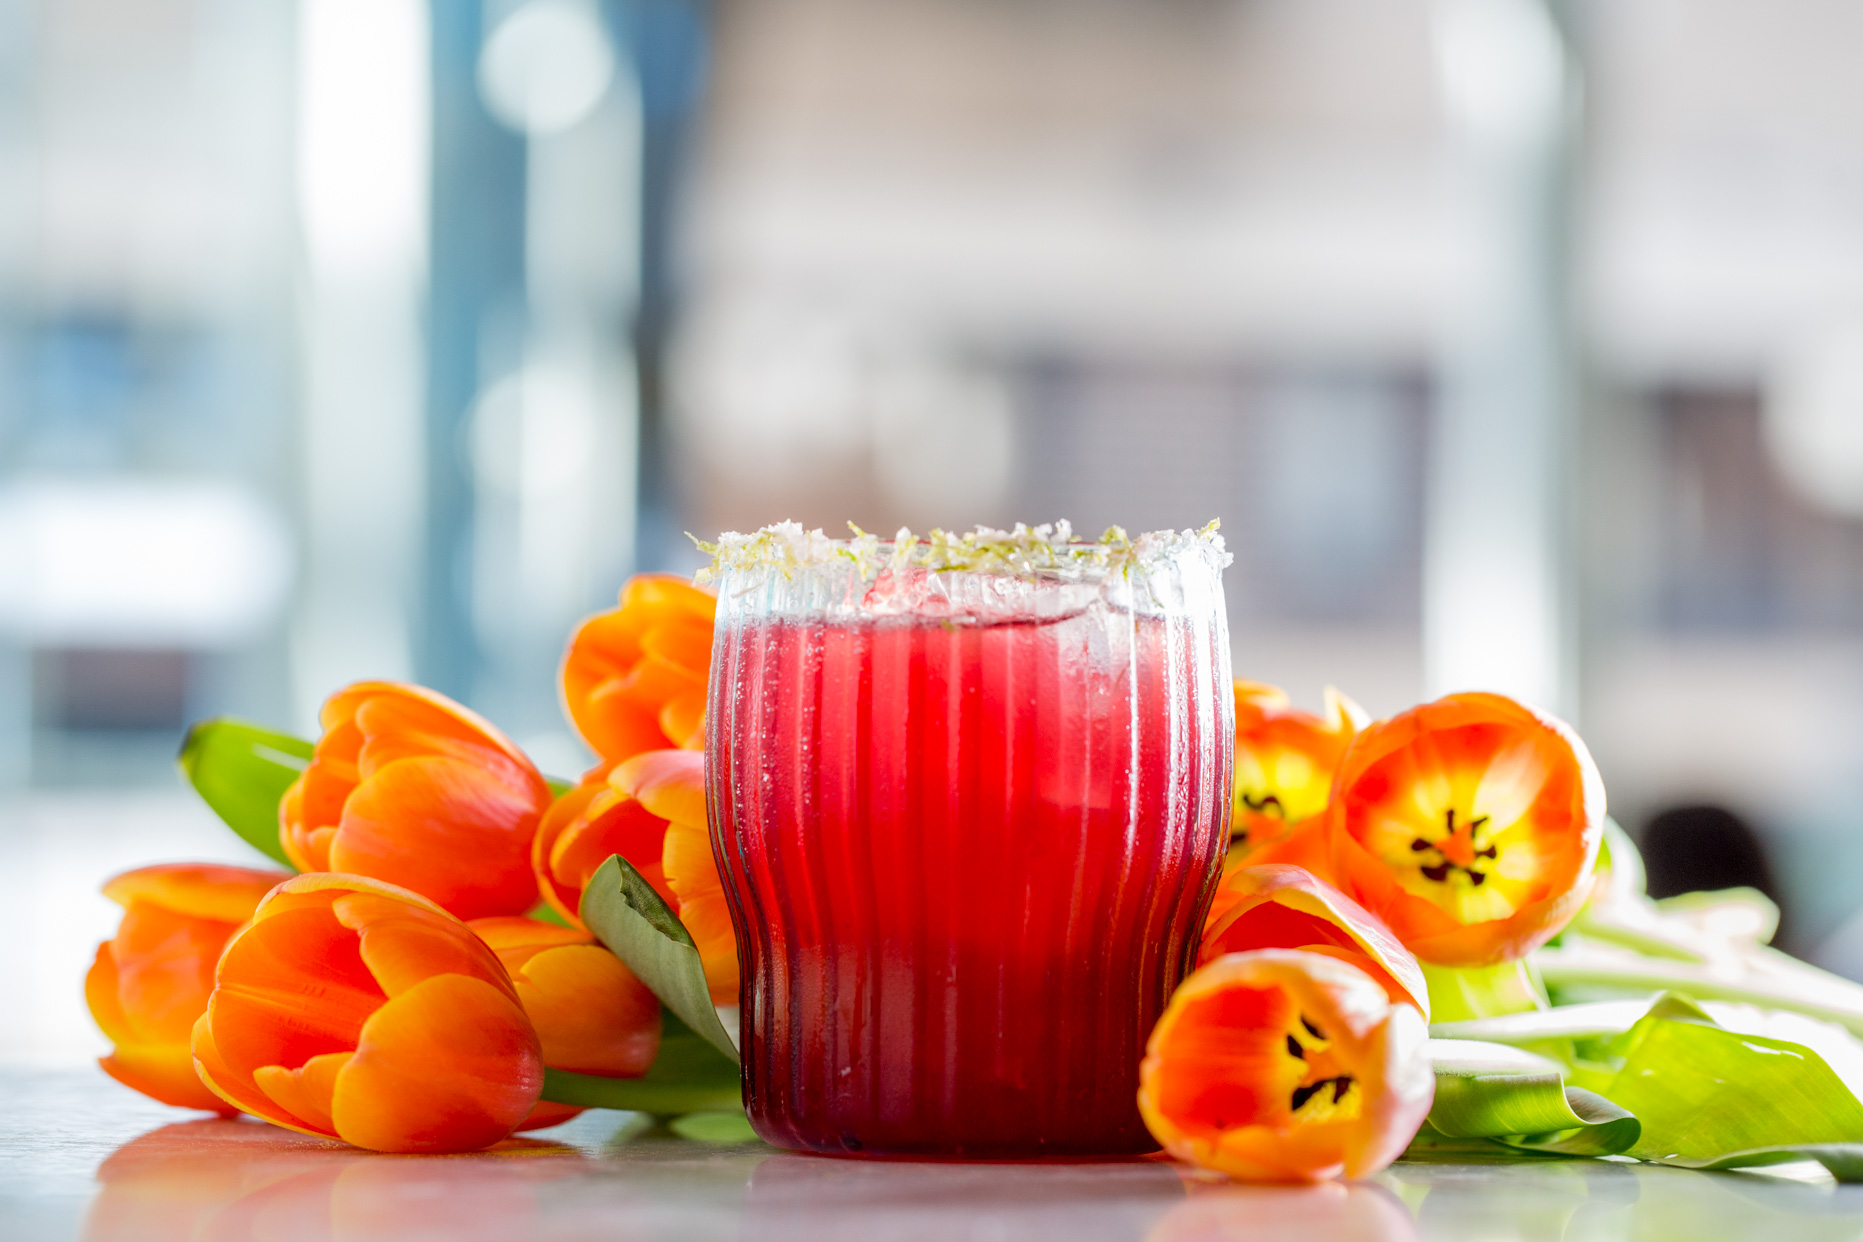 Tulips adorning a beautifully colorful cocktail